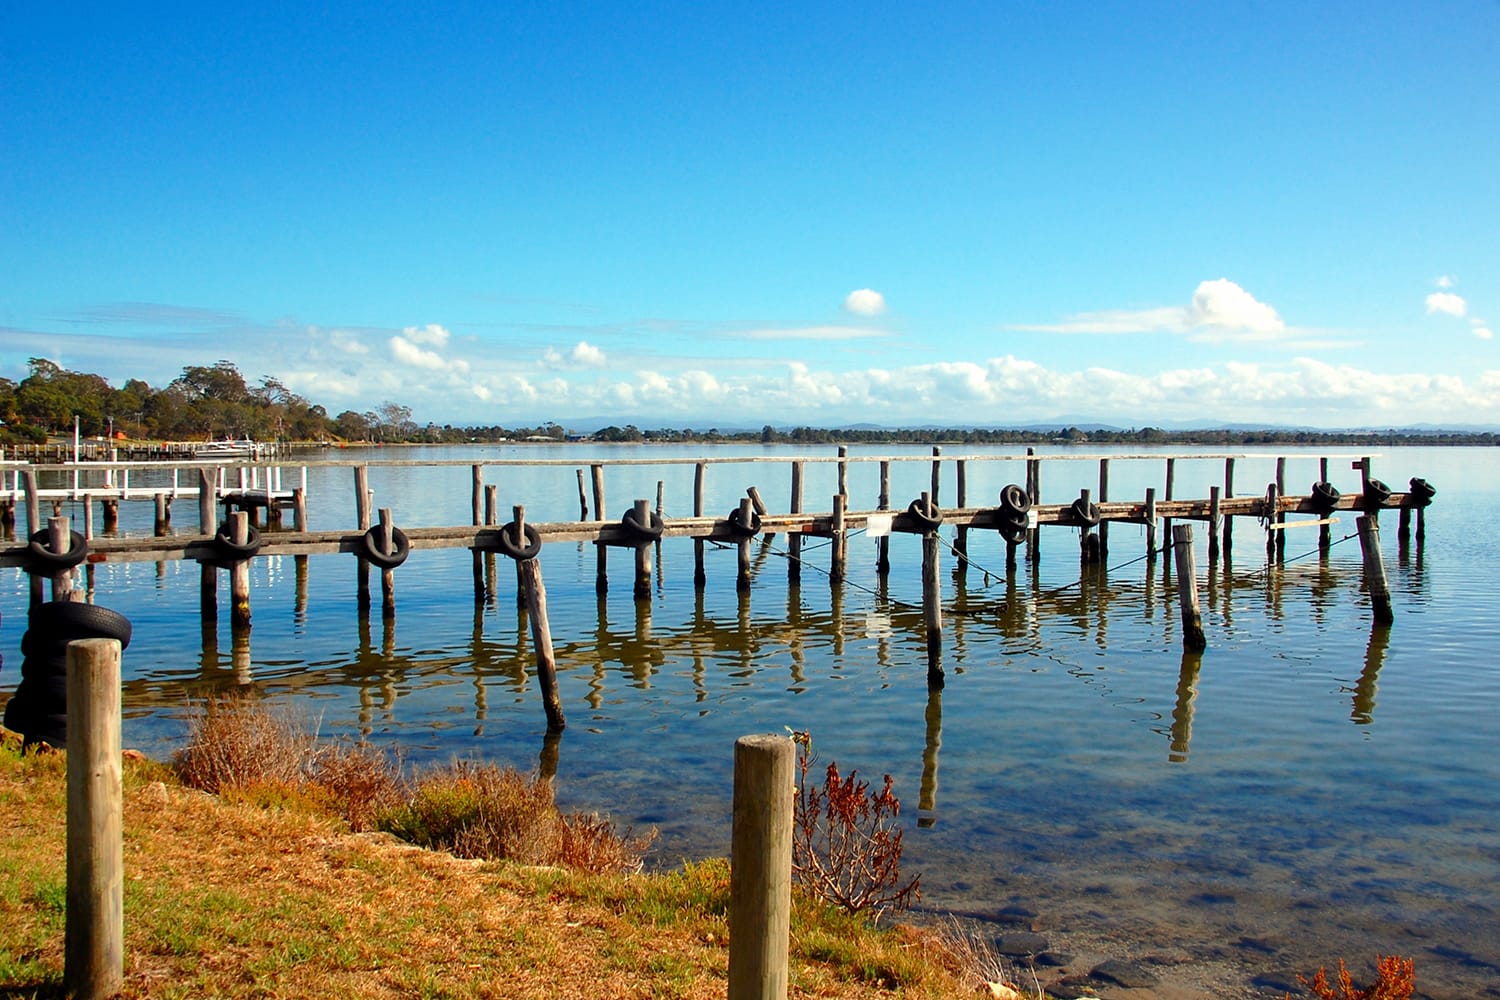 Fishing pier, Eagle Point, small town in Victoria, Australia known by its Lake King, reserve and bushland.